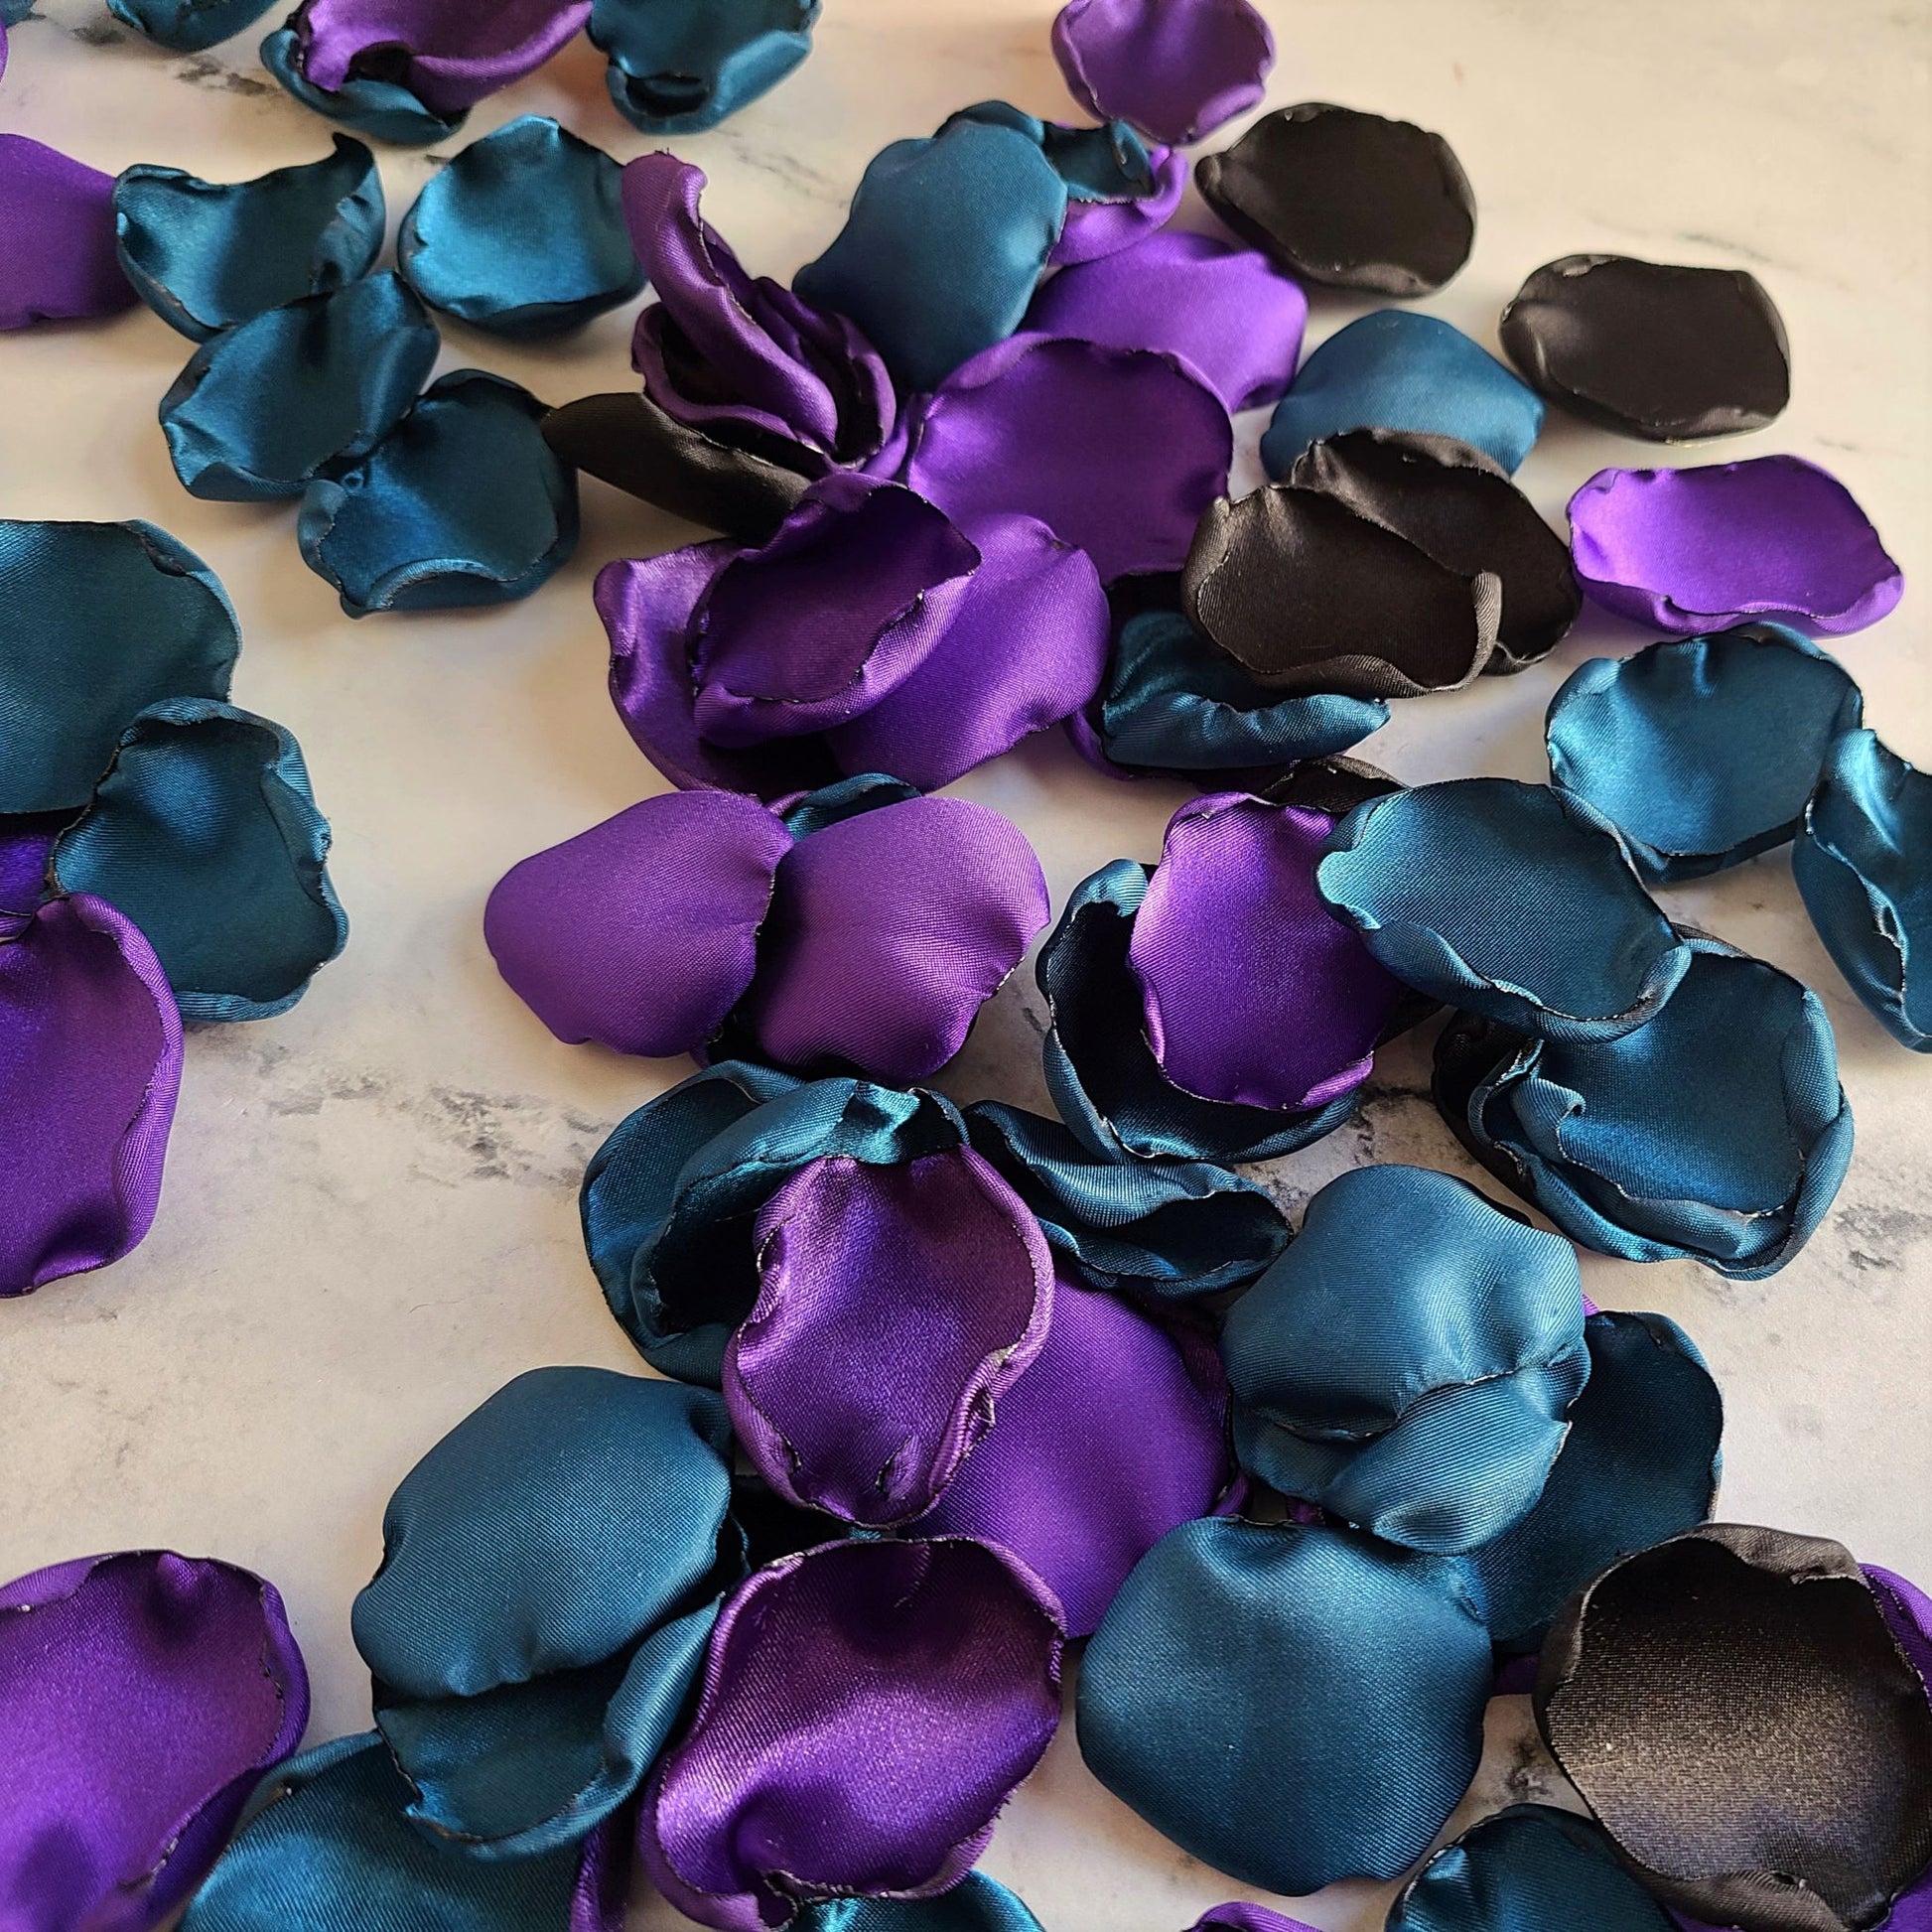 Goth Purple Black and Teal rose petals, flower petals for fall wedding ceremony